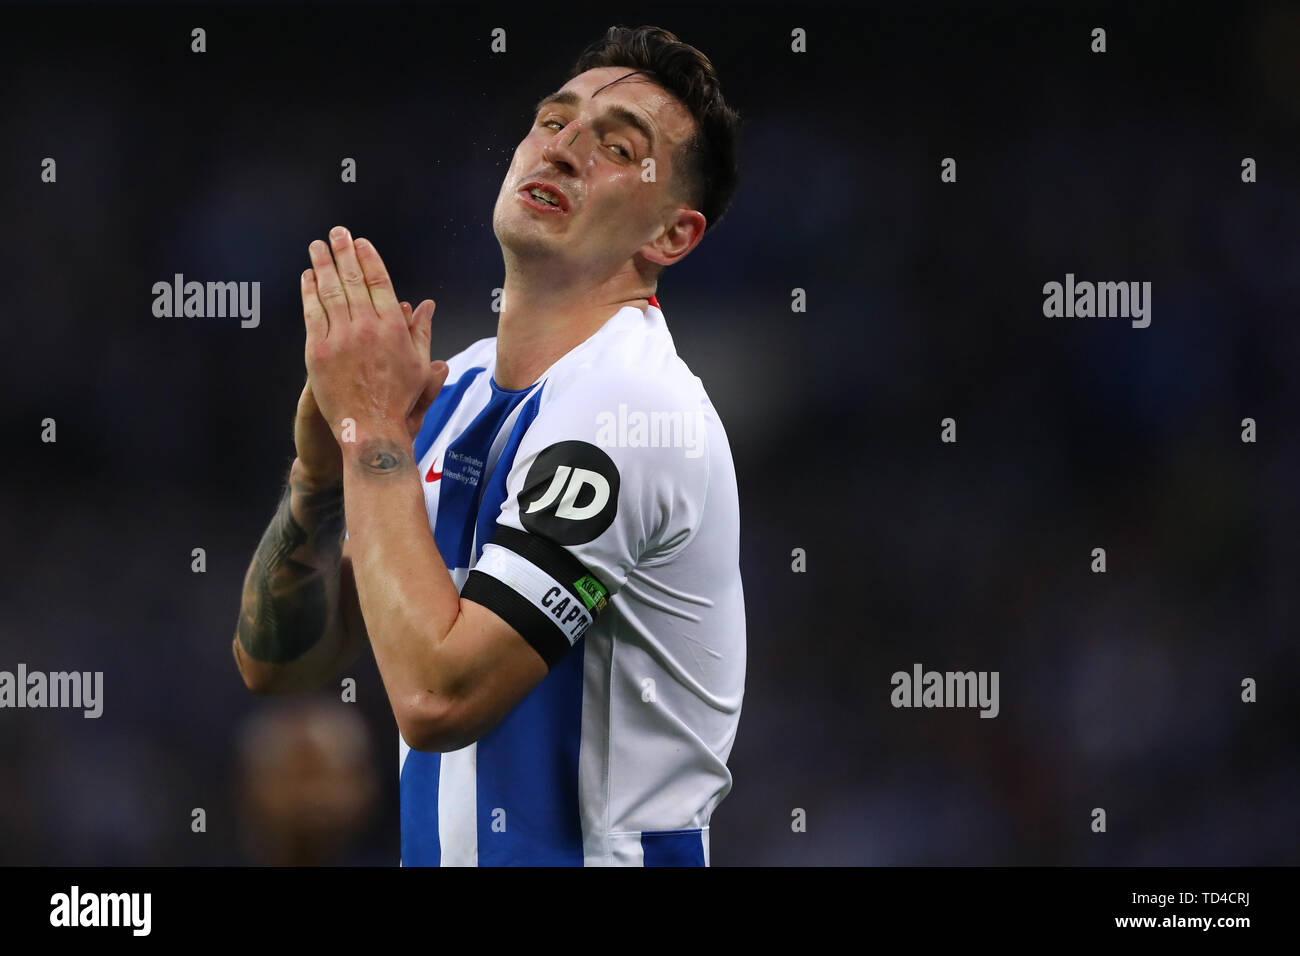 A dejected Lewis Dunk of Brighton & Hove Albion at the final whistle after being knocked out to Manchester City - Manchester City v Brighton & Hove Albion, The Emirates FA Cup Semi Final, Wembley Stadium, London - 6th April 2019  Editorial Use Only Stock Photo